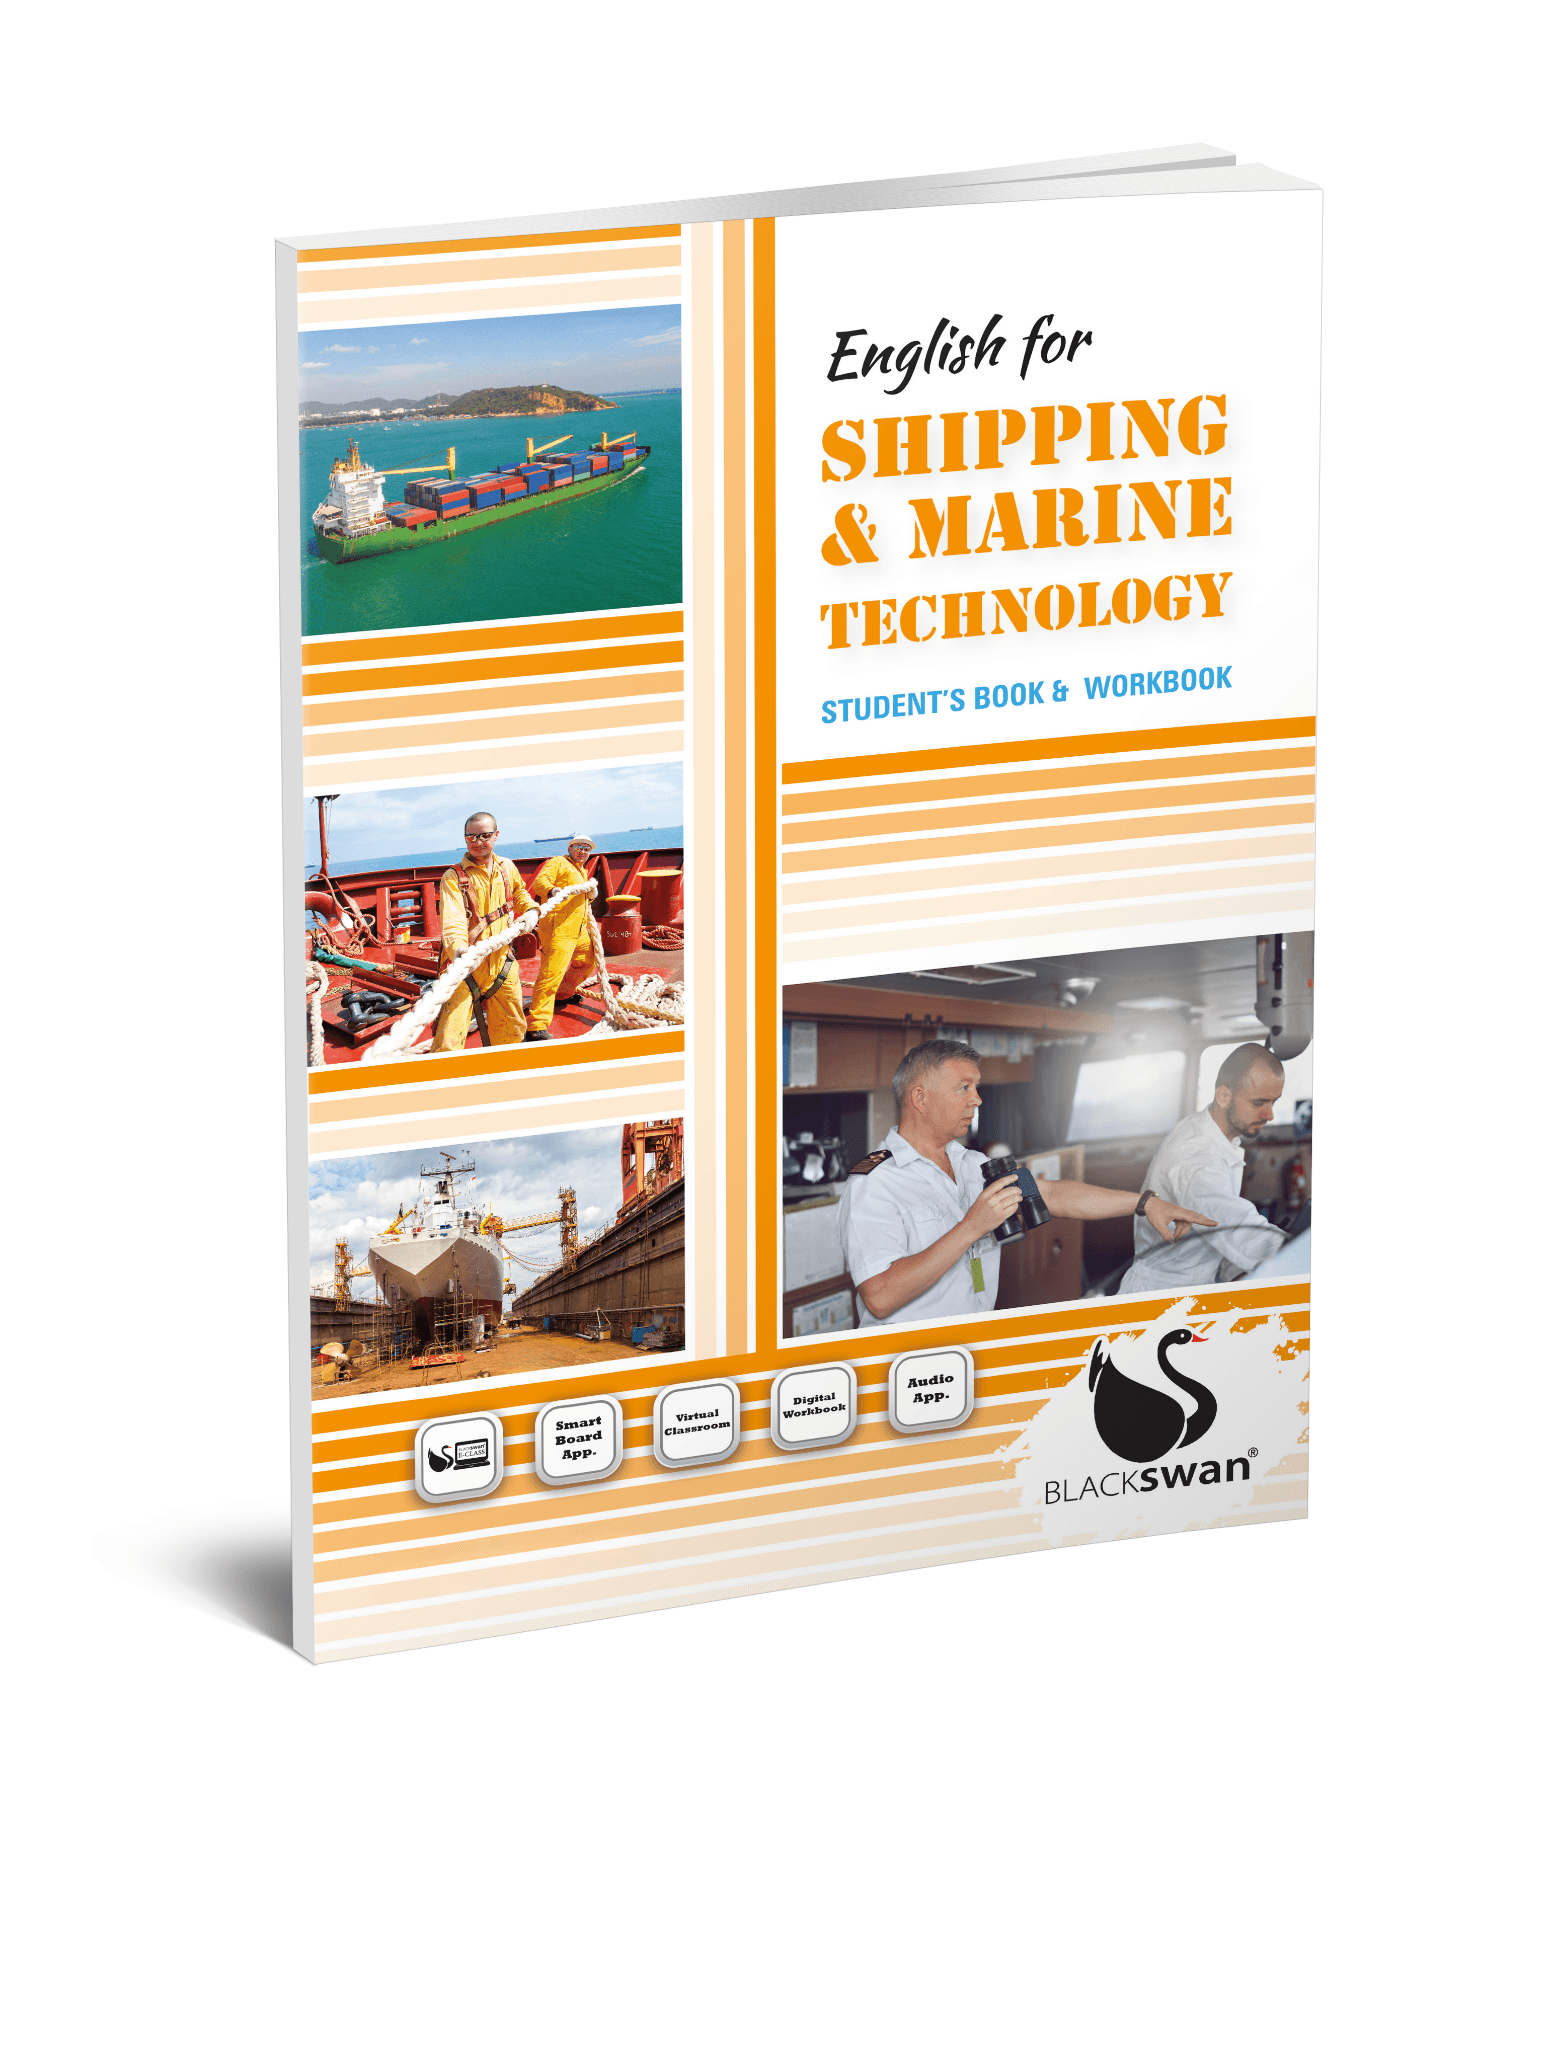 English for Shipping and Marine Technology 1 Student's Book & Workbook